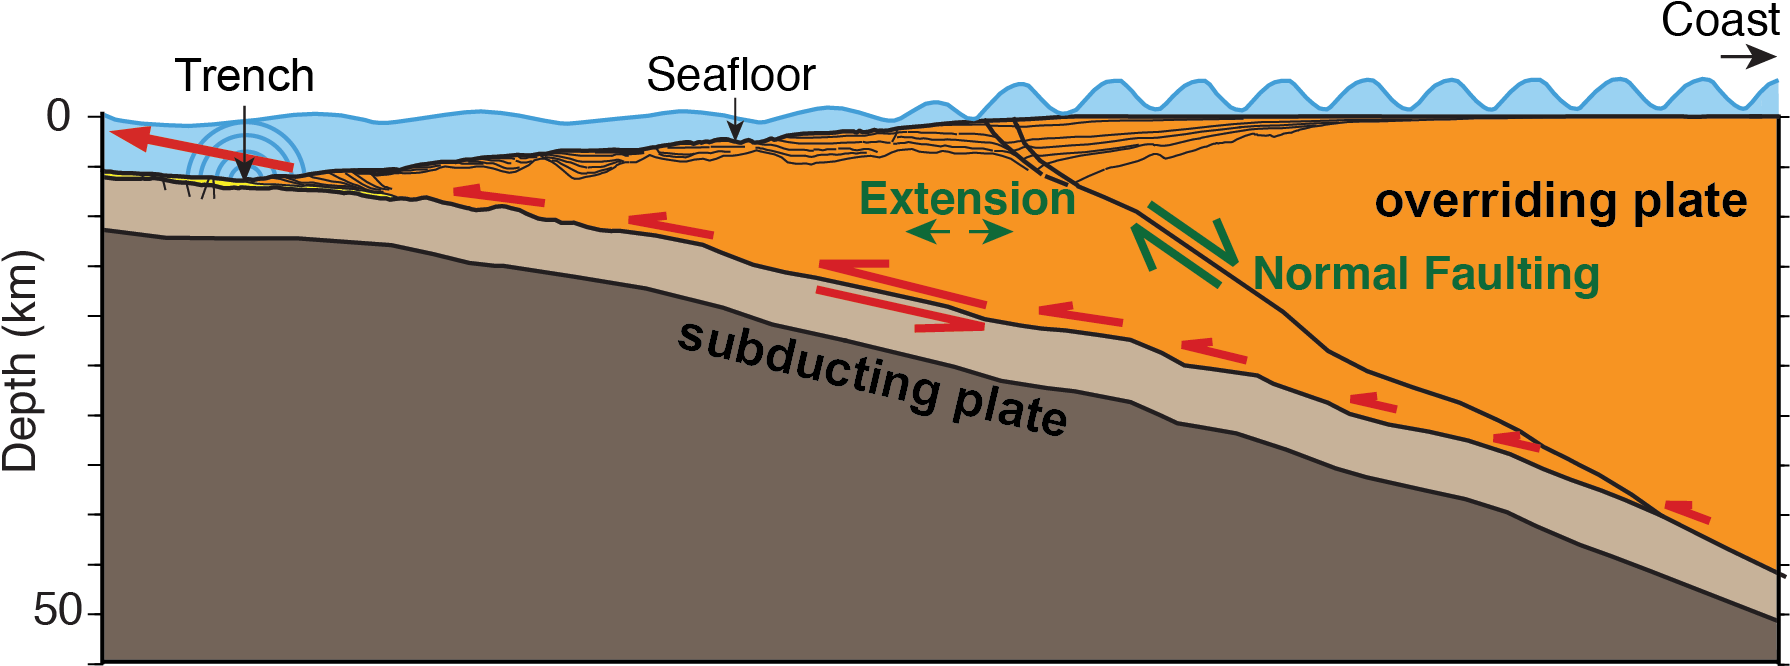 A Diagram Of A Subducting Plate